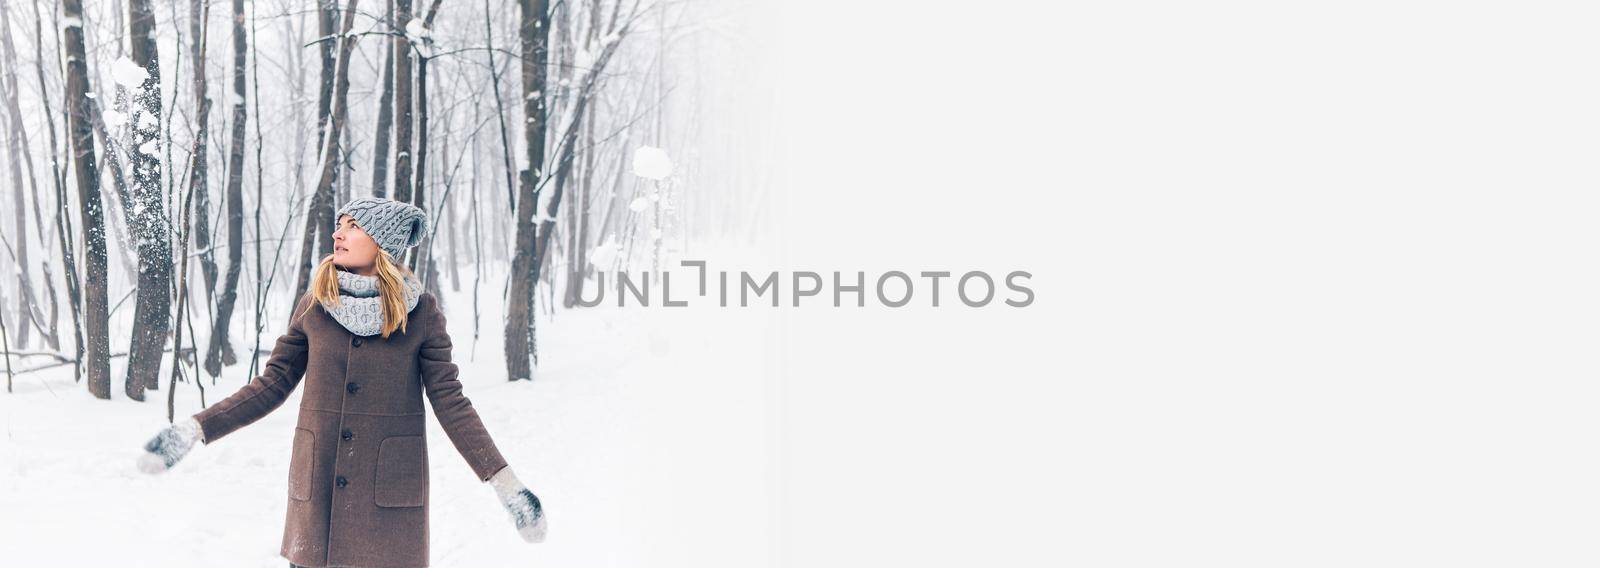 Banner beautiful young girl in winter snow forest copy space by Satura86